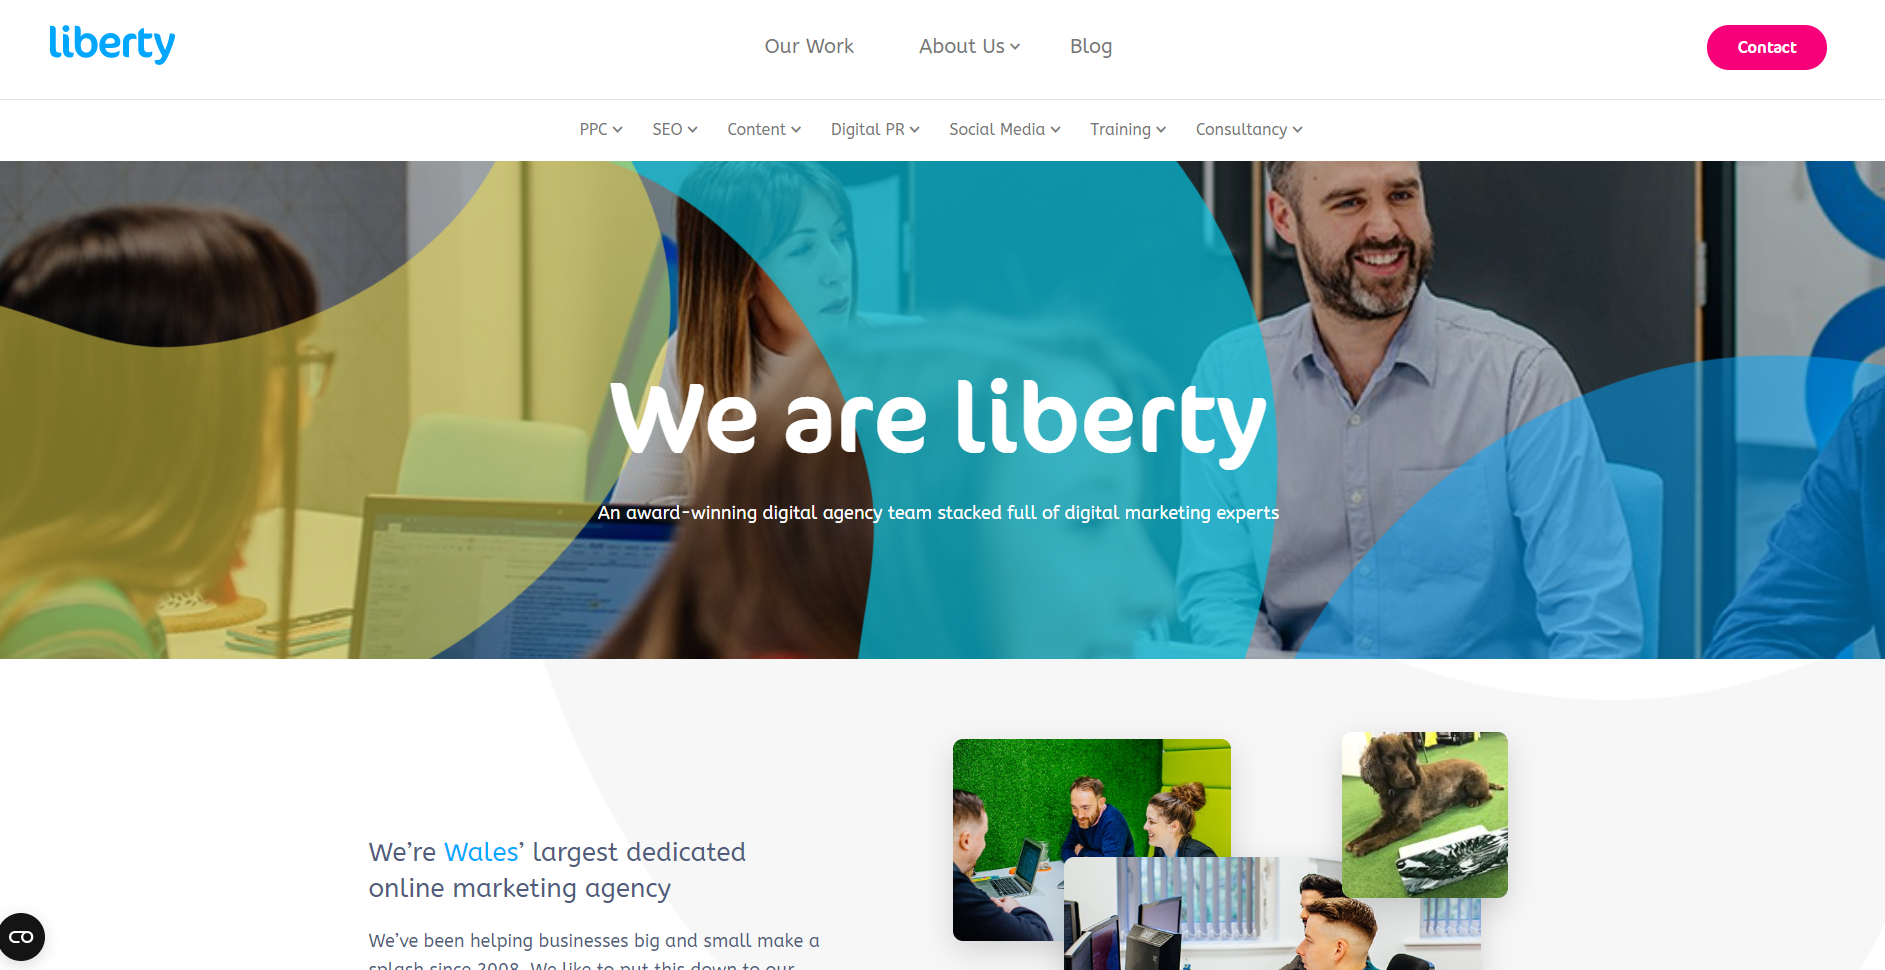 Liberty Marketing is one of the top paid media agencies in the UK